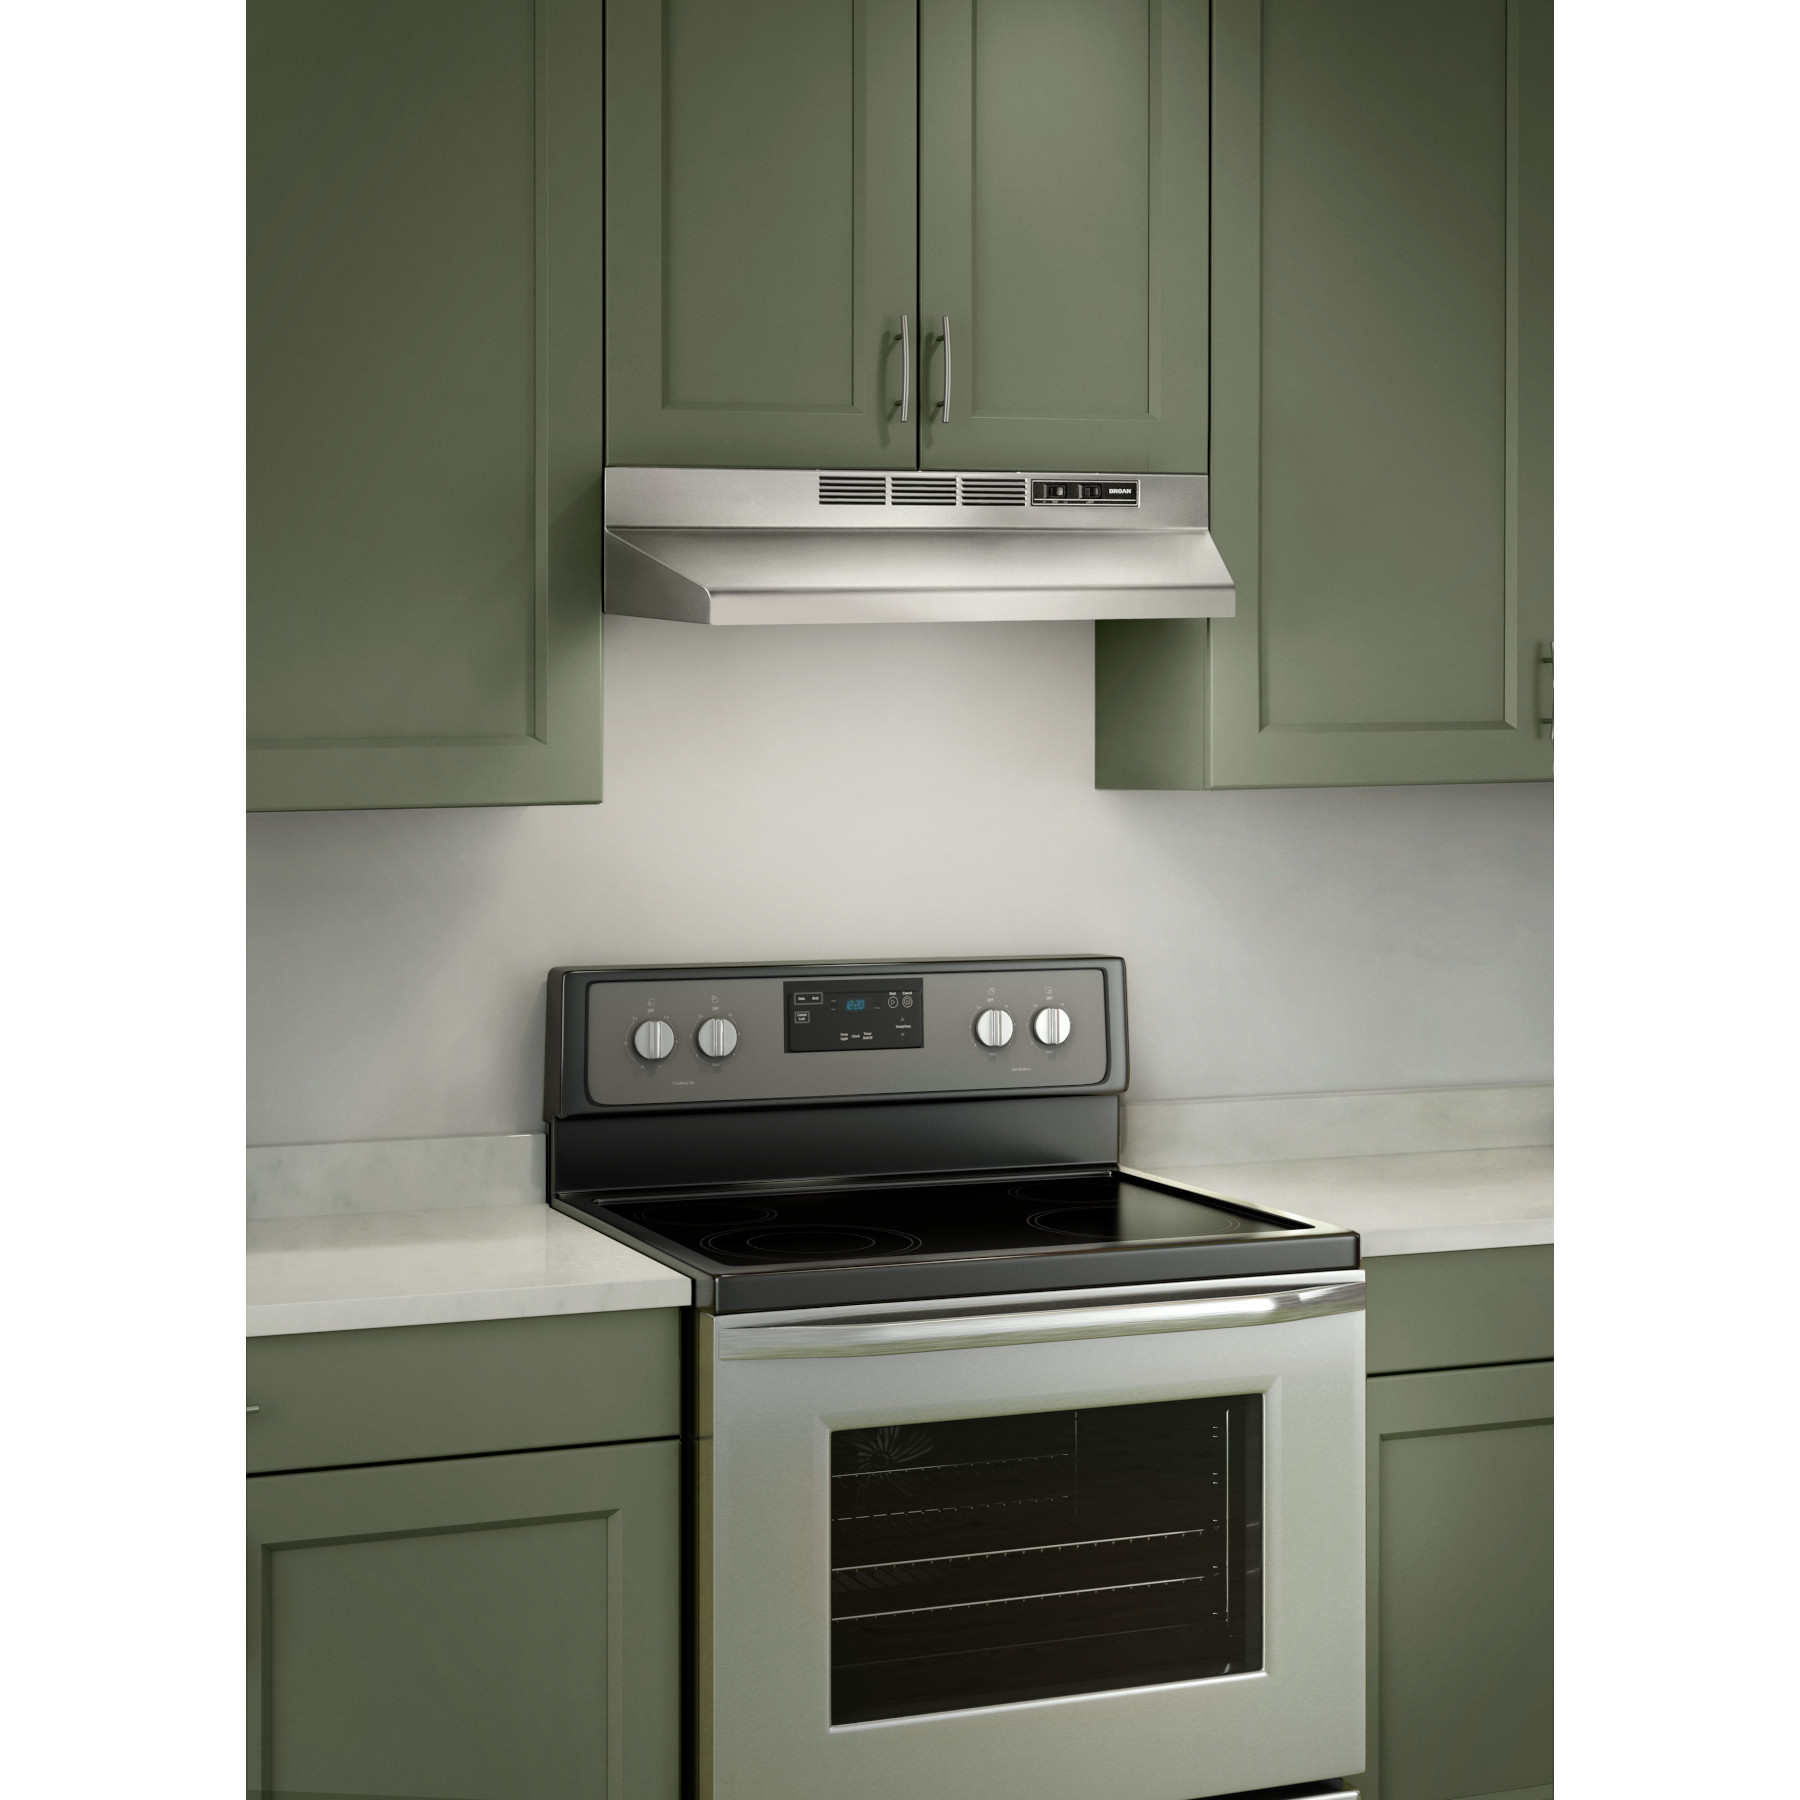 Broan 4136 Broan 4136 36 Wide Steel Non Ducted Under Cabinet Range Hood with Charcoal Filt - Stainless Steel